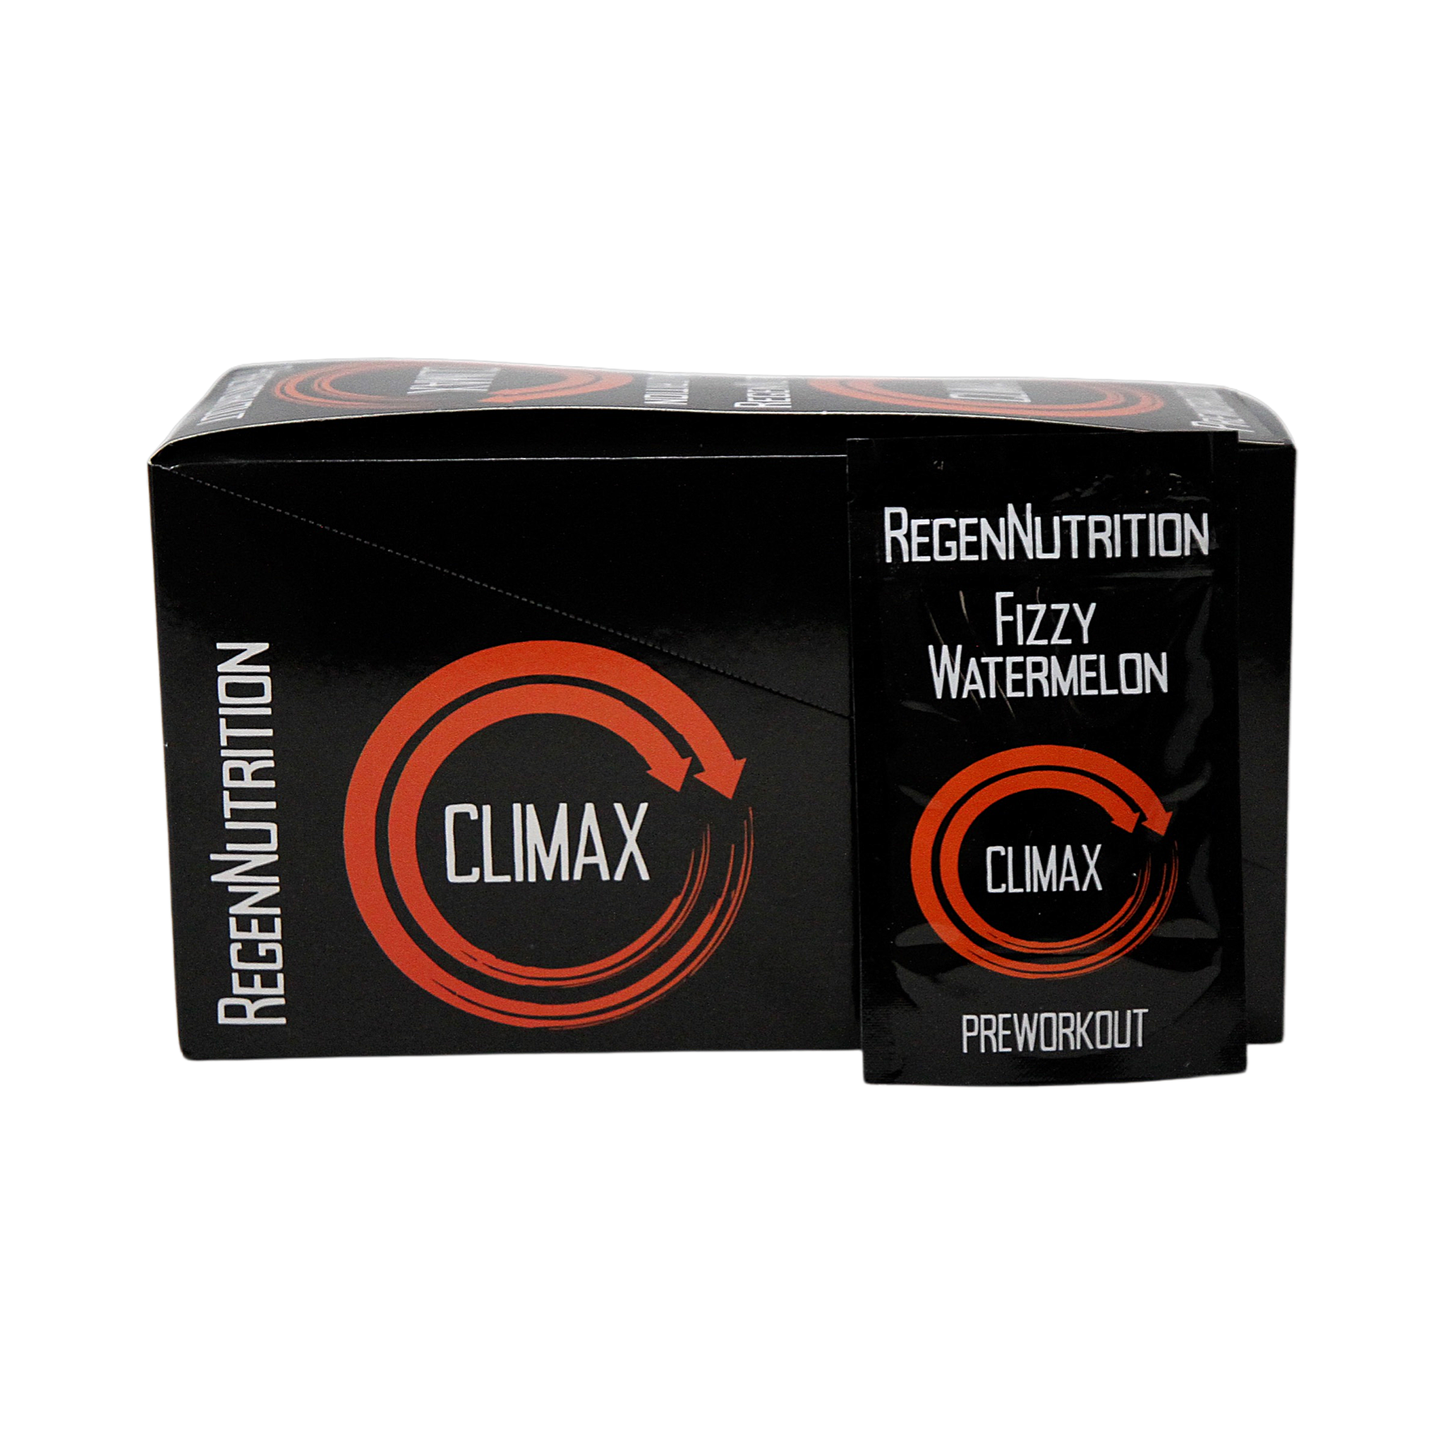 Fizzy Watermelon CLIMAX Preworkout Packets